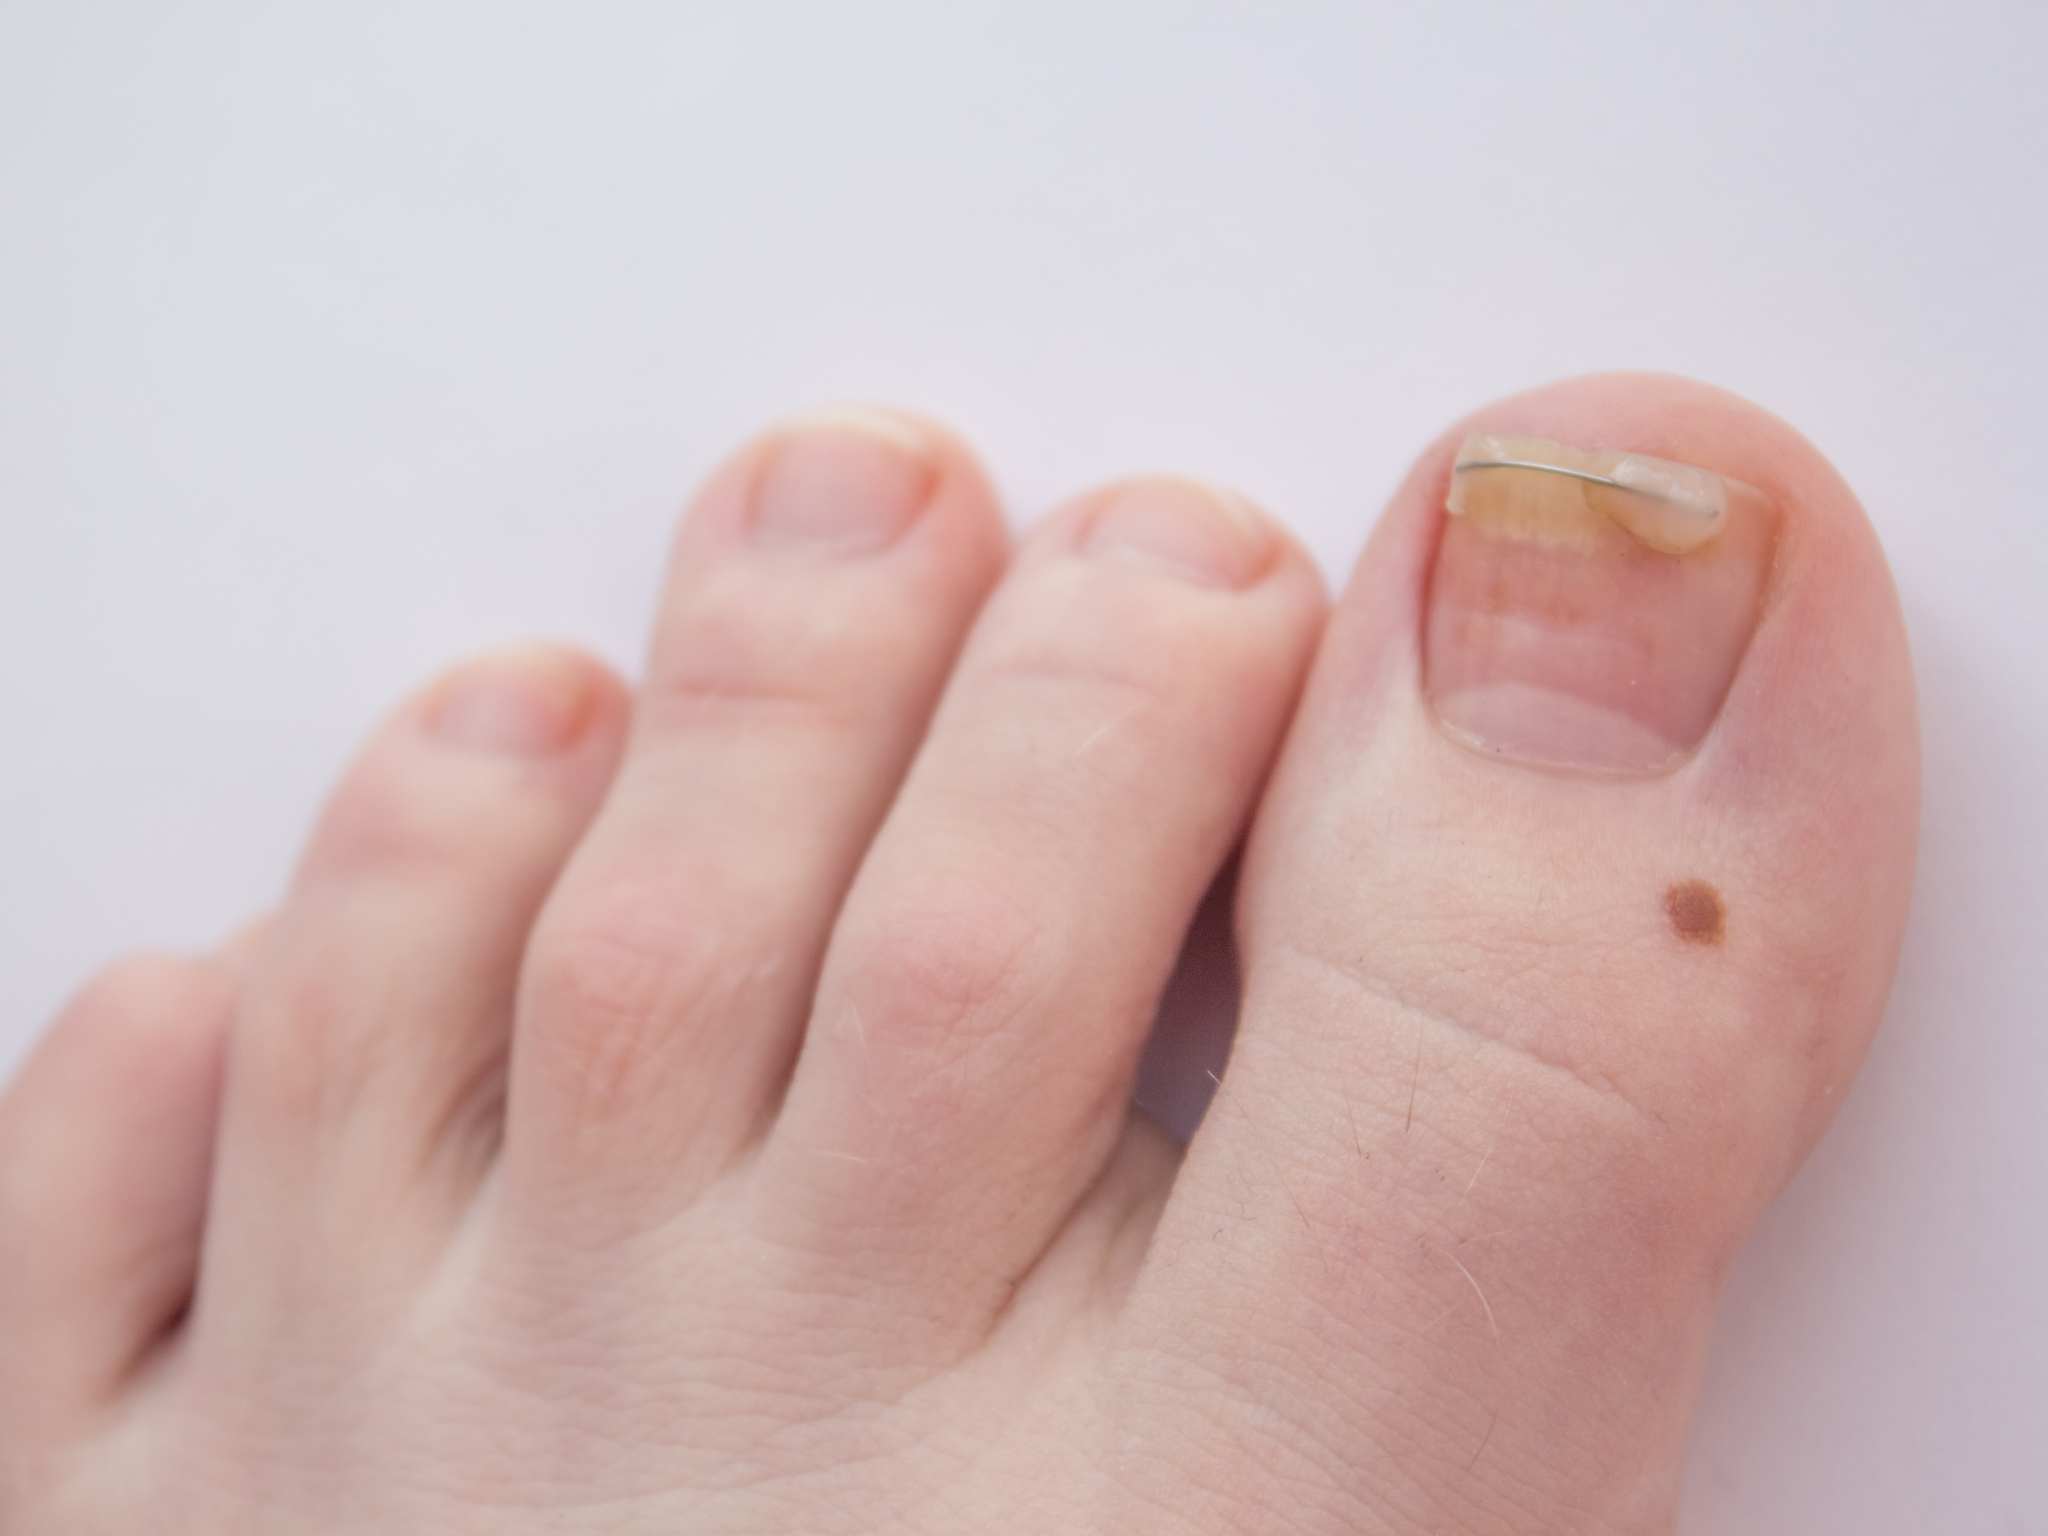 ingrown nail treatment. Hardware manicure. Concept body care.